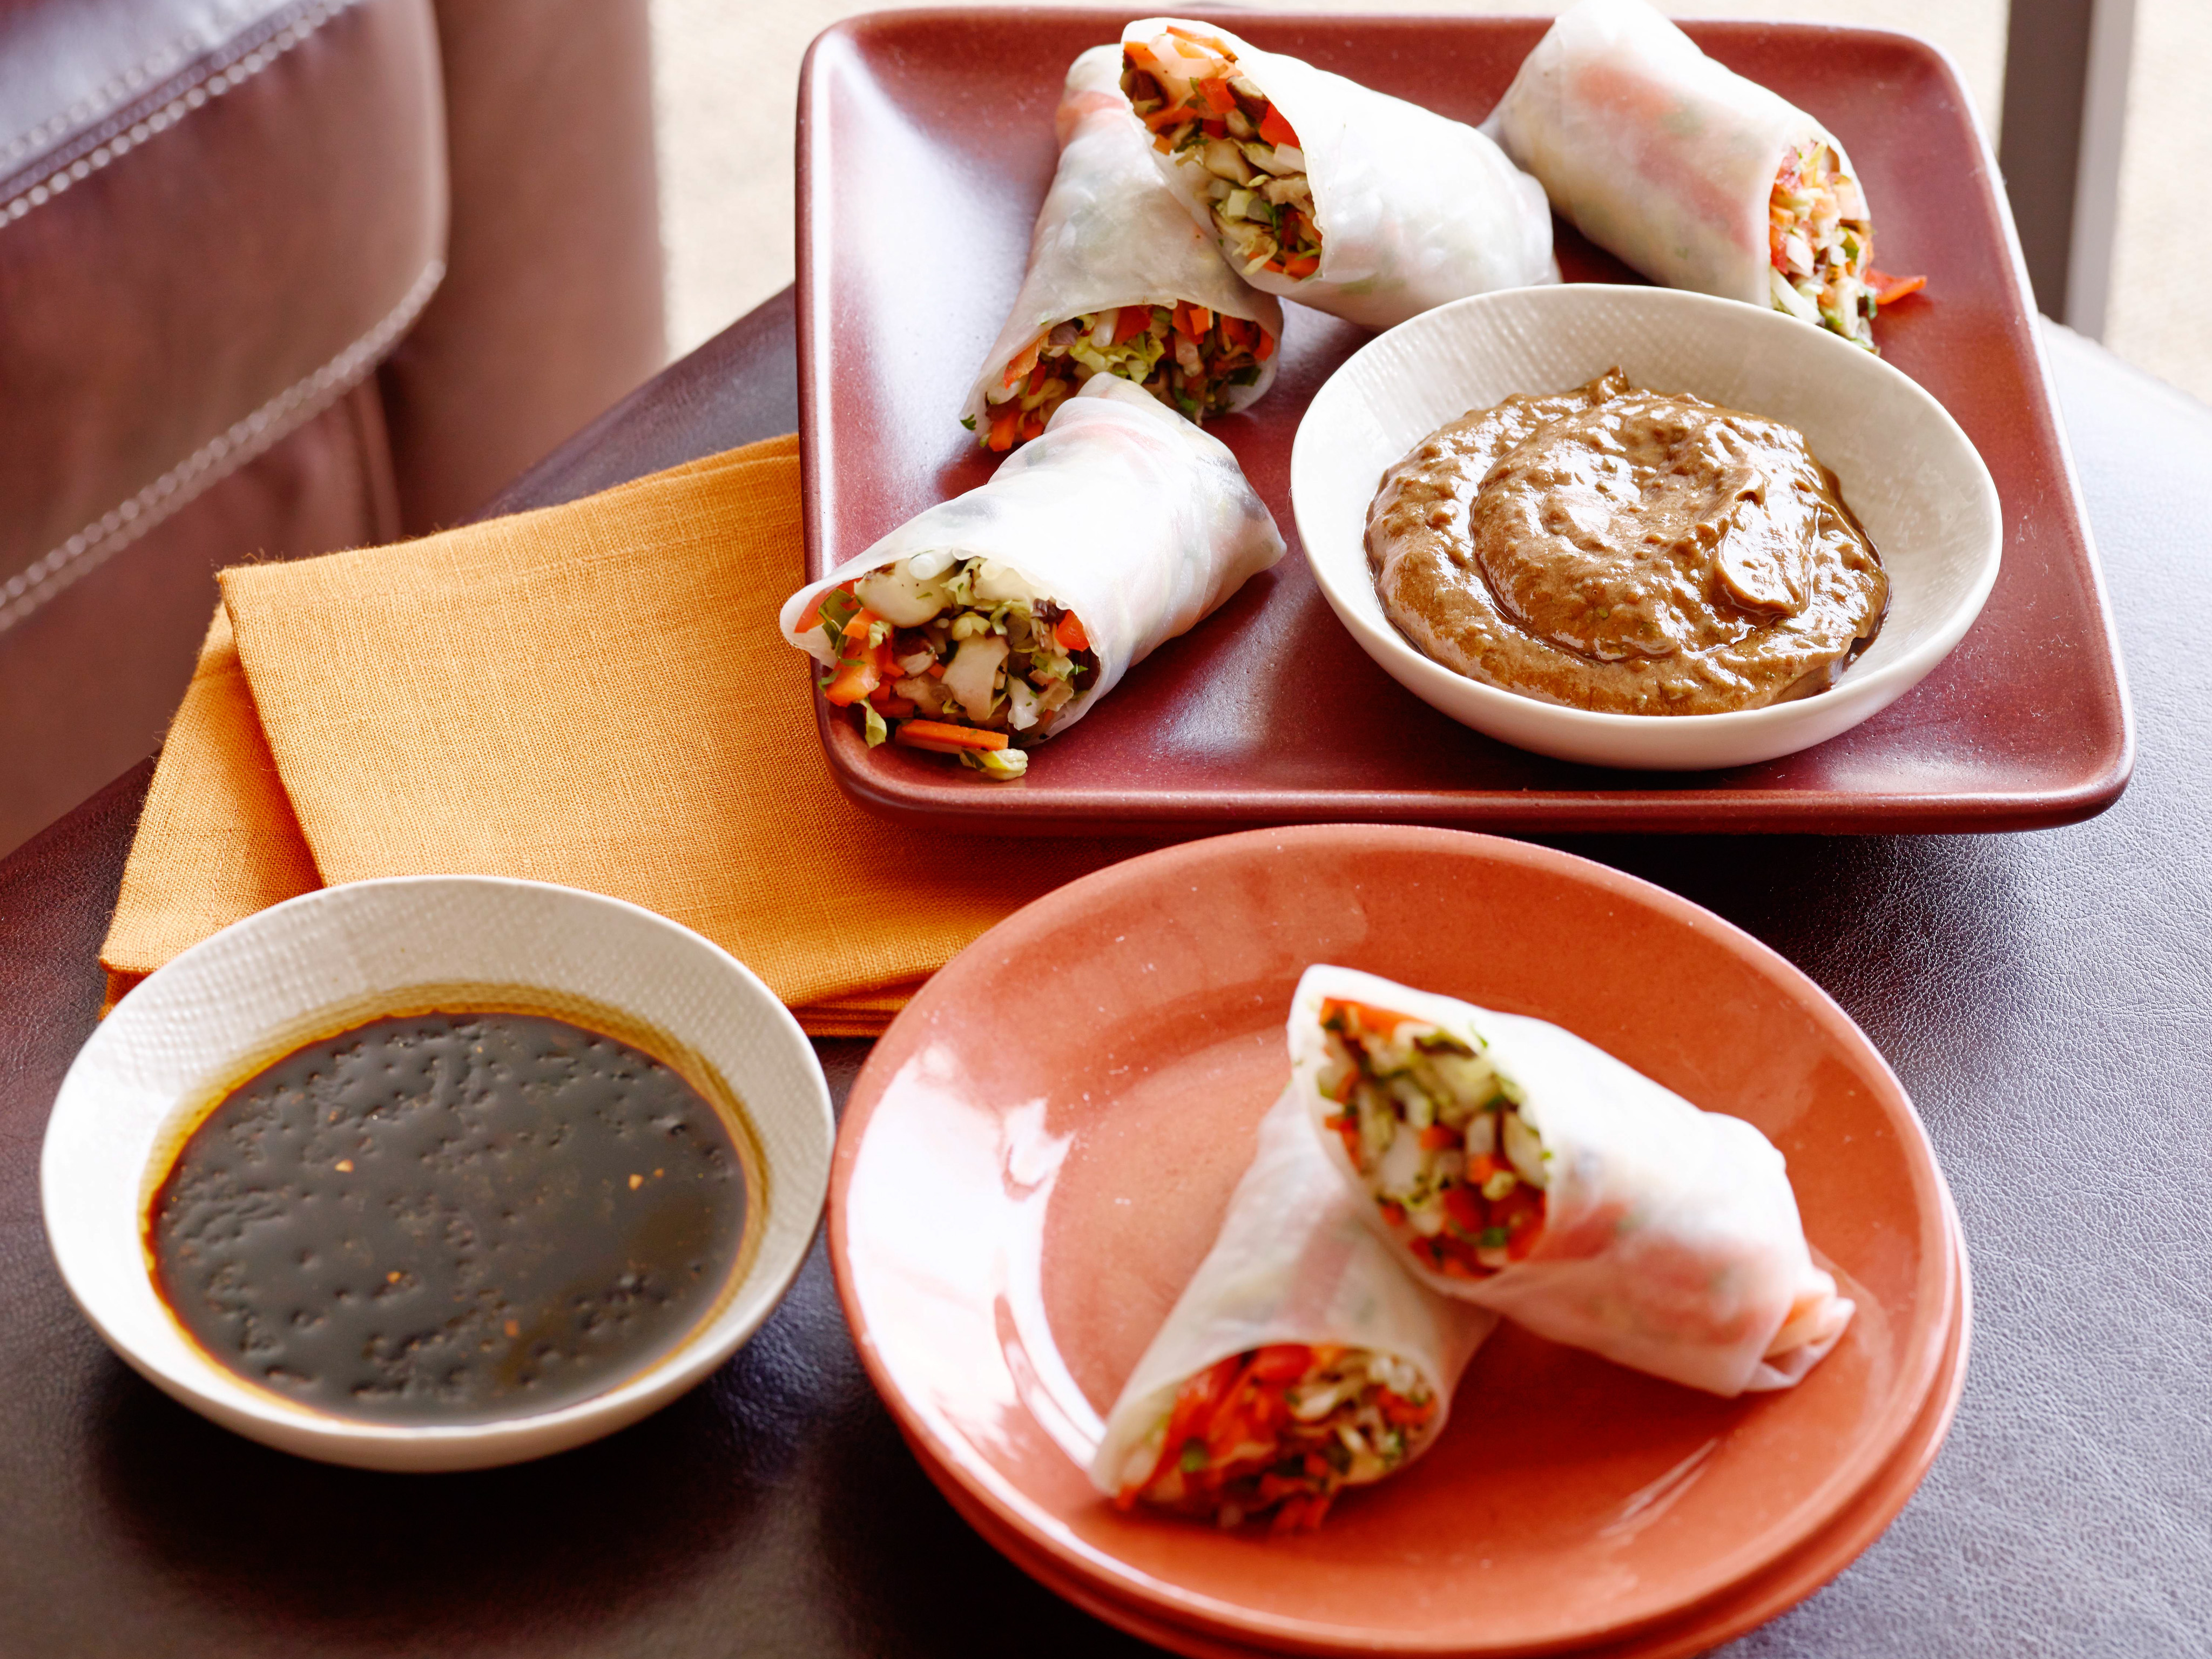 https://www.foodnetwork.com/content/dam/images/food/fullset/2014/7/2/0/HG1A23_Fresh-Vegetable-Spring-Rolls-with-Two-Dipping-Sauces_s4x3.jpg